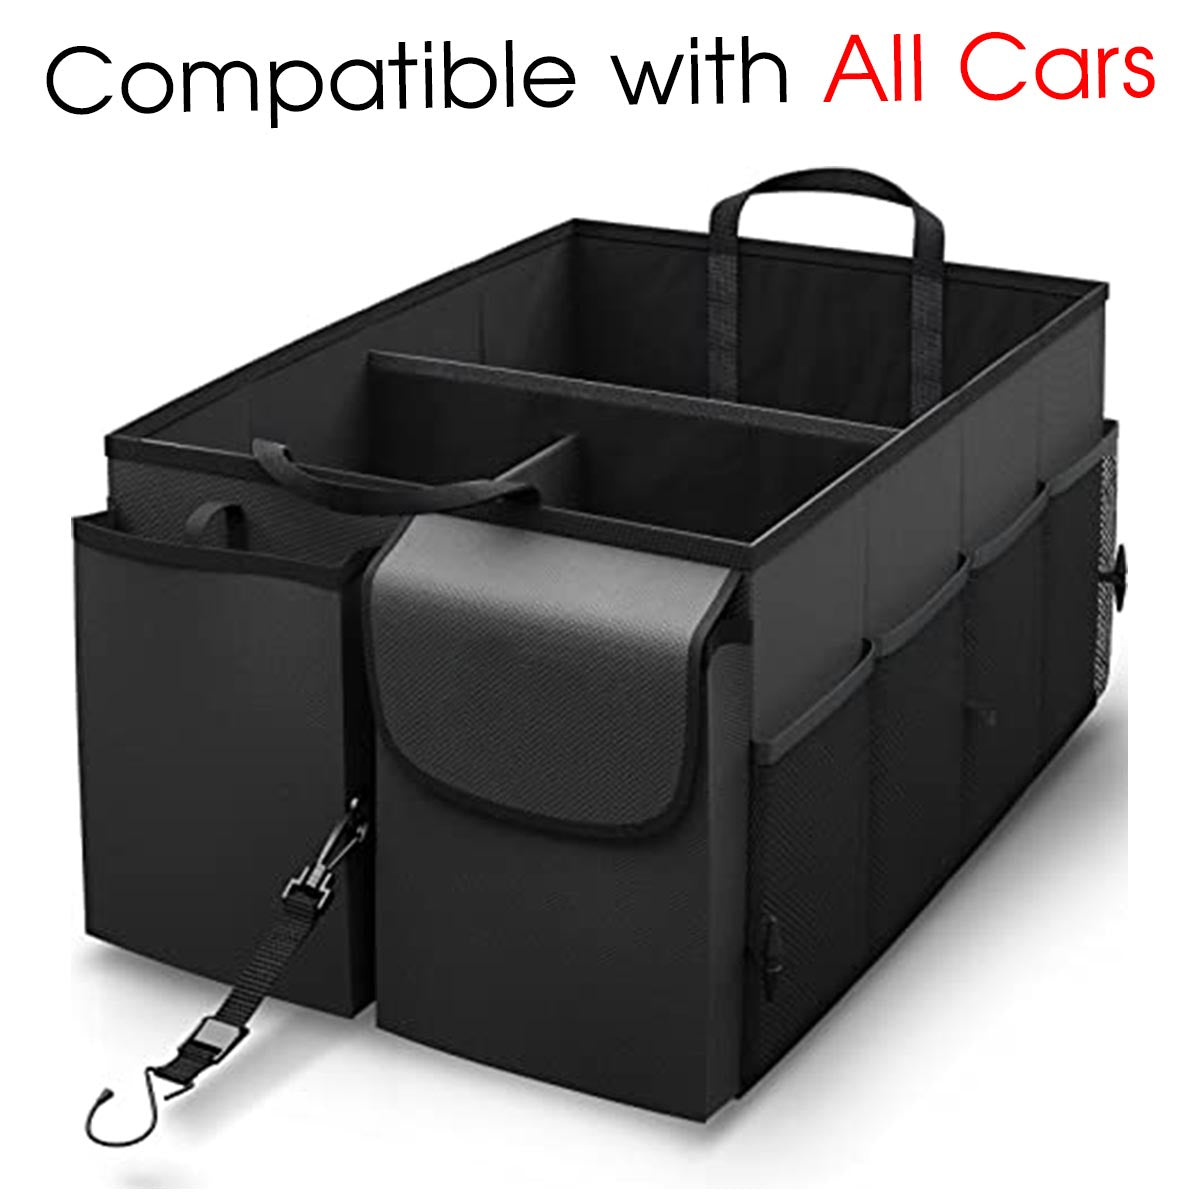 Car Trunk Organizer - Collapsible, Custom fit for All Cars, Multi-Compartment Automotive SUV Car Organizer for Storage w/ Adjustable Straps - Car Accessories for Women and Men JG12993